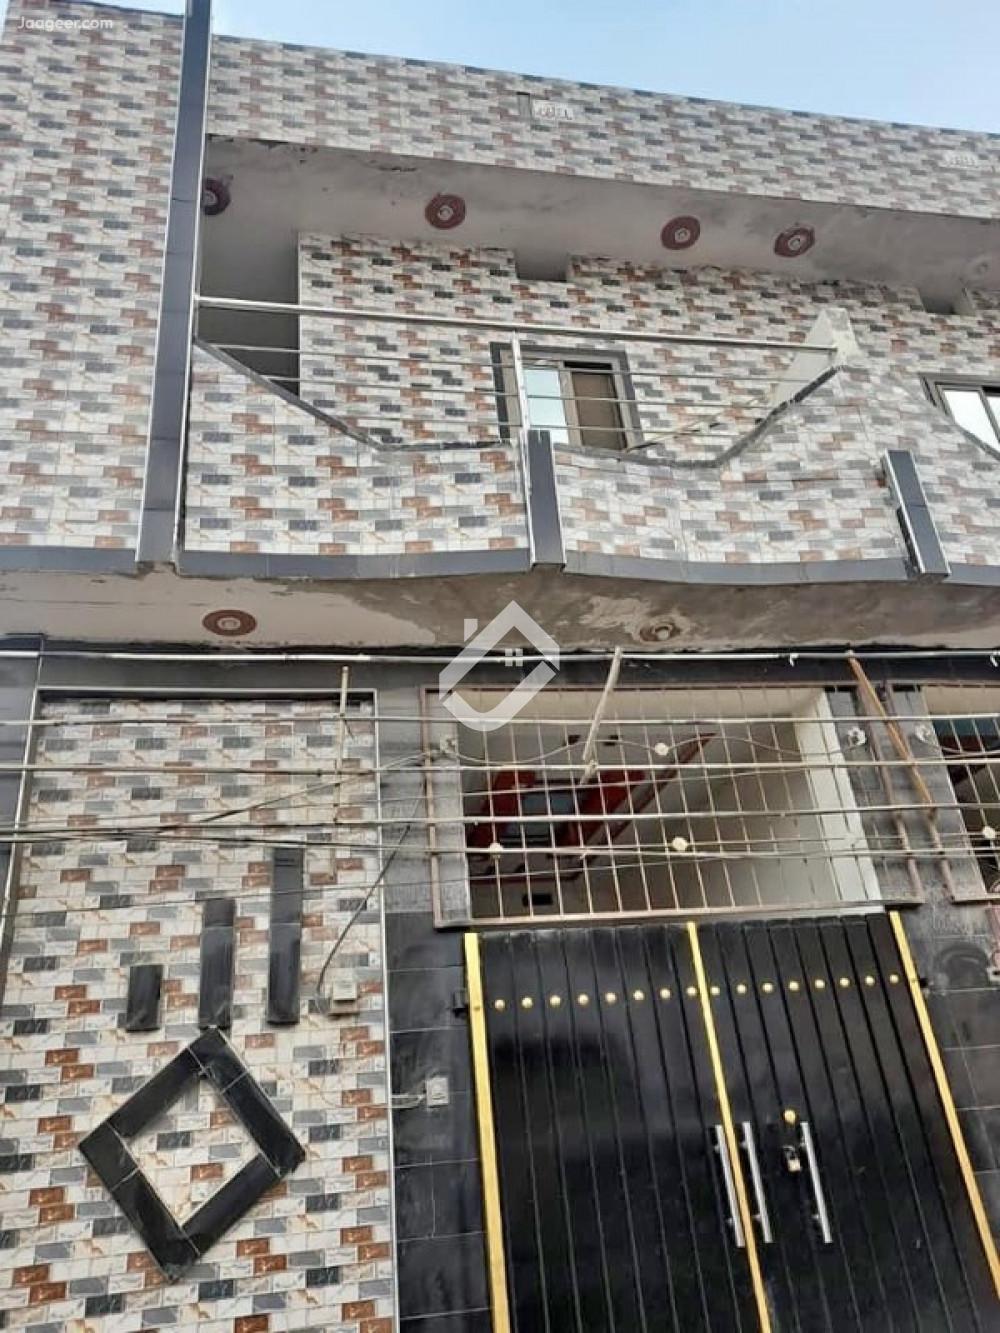 View  3 Marla Double Story House For Sale In Bashir Colony  9 No Chungi Street 15 in Bashir Colony, Sargodha